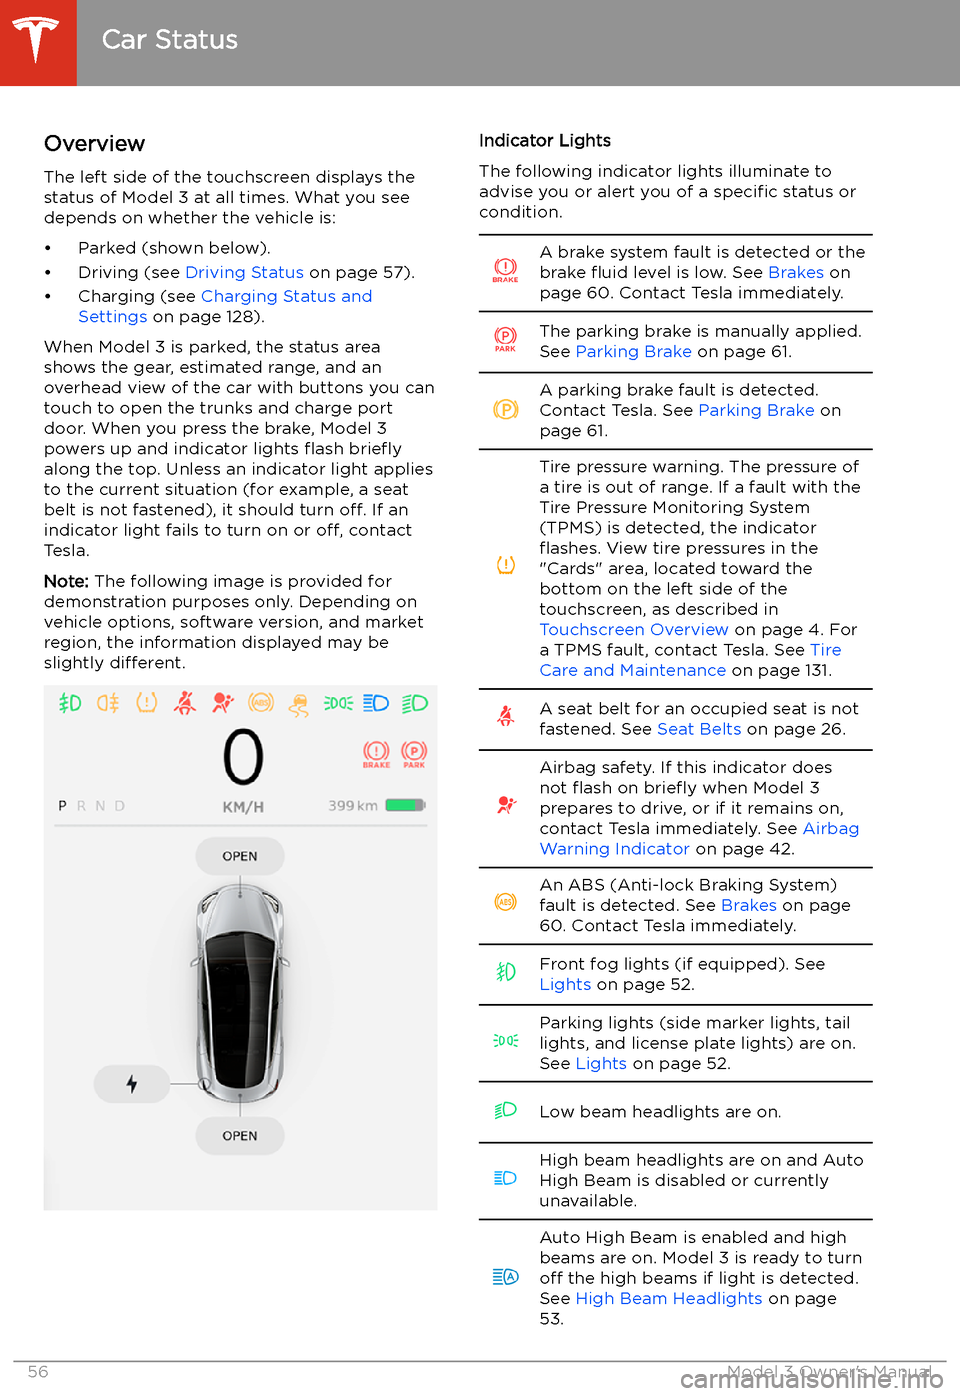 TESLA MODEL 3 2019   (Europe) Workshop Manual Car Status
Overview
The left side of the touchscreen displays the
status of Model 3 at all times. What you see
depends on whether the vehicle is:
